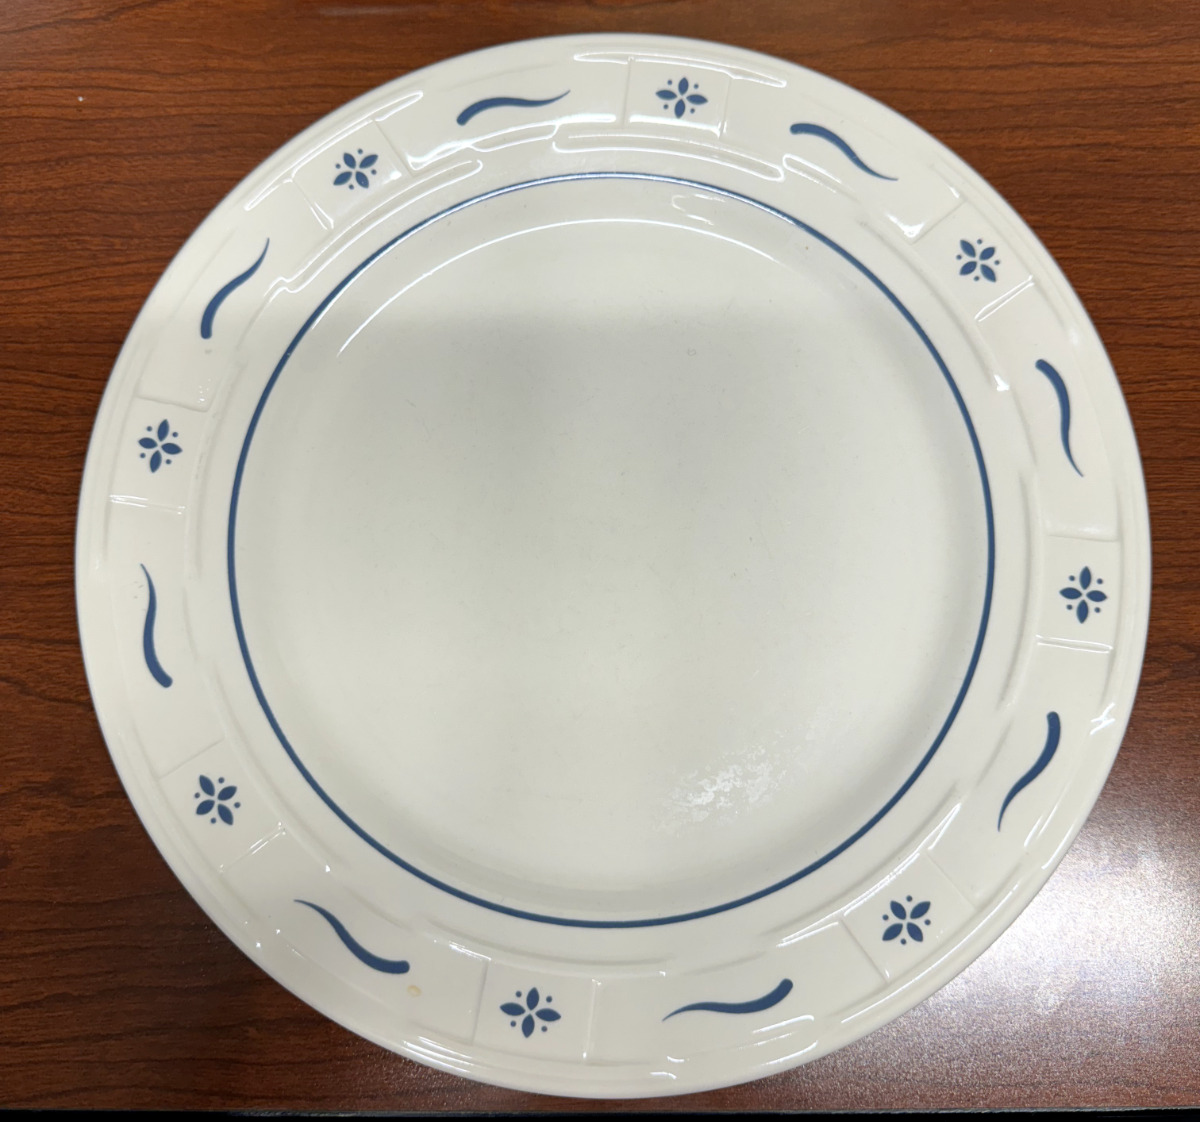 Longaberger - Woven Traditions Pottery - Classic Blue Rim - Dinner Plate